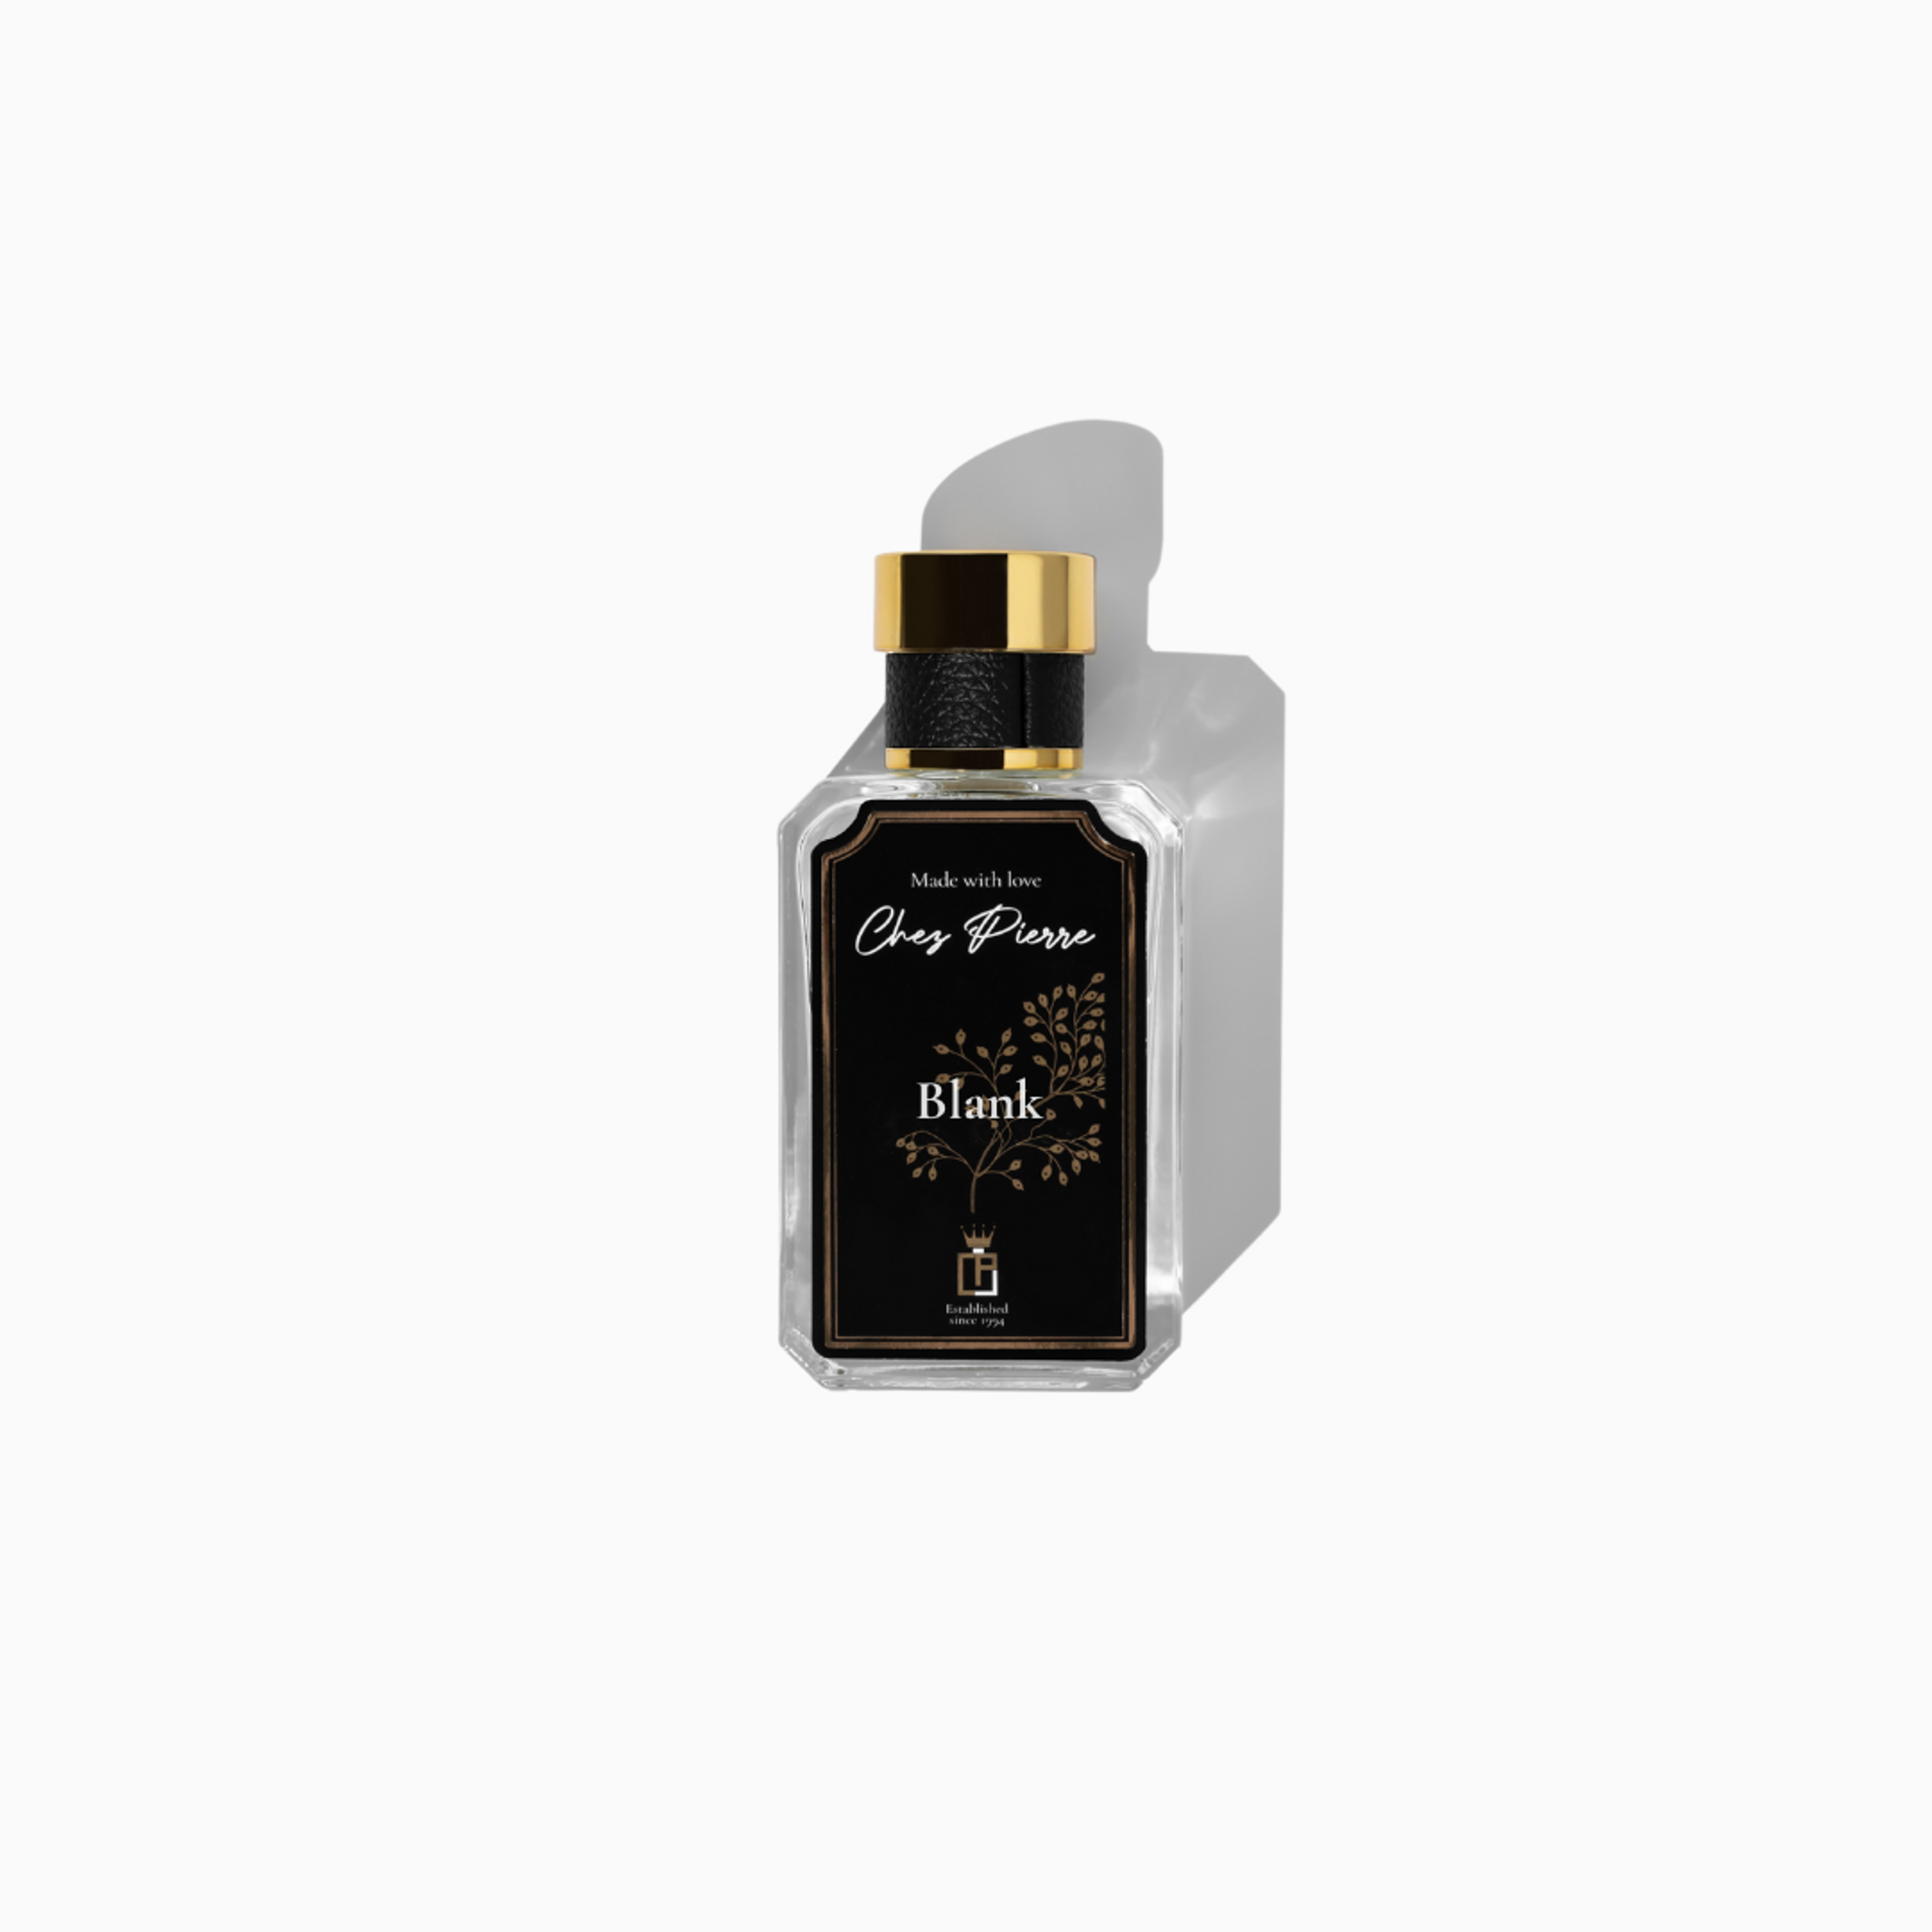 Chez Pierre's Blank Perfume Inspired By Tom Ford Soleil Blanc